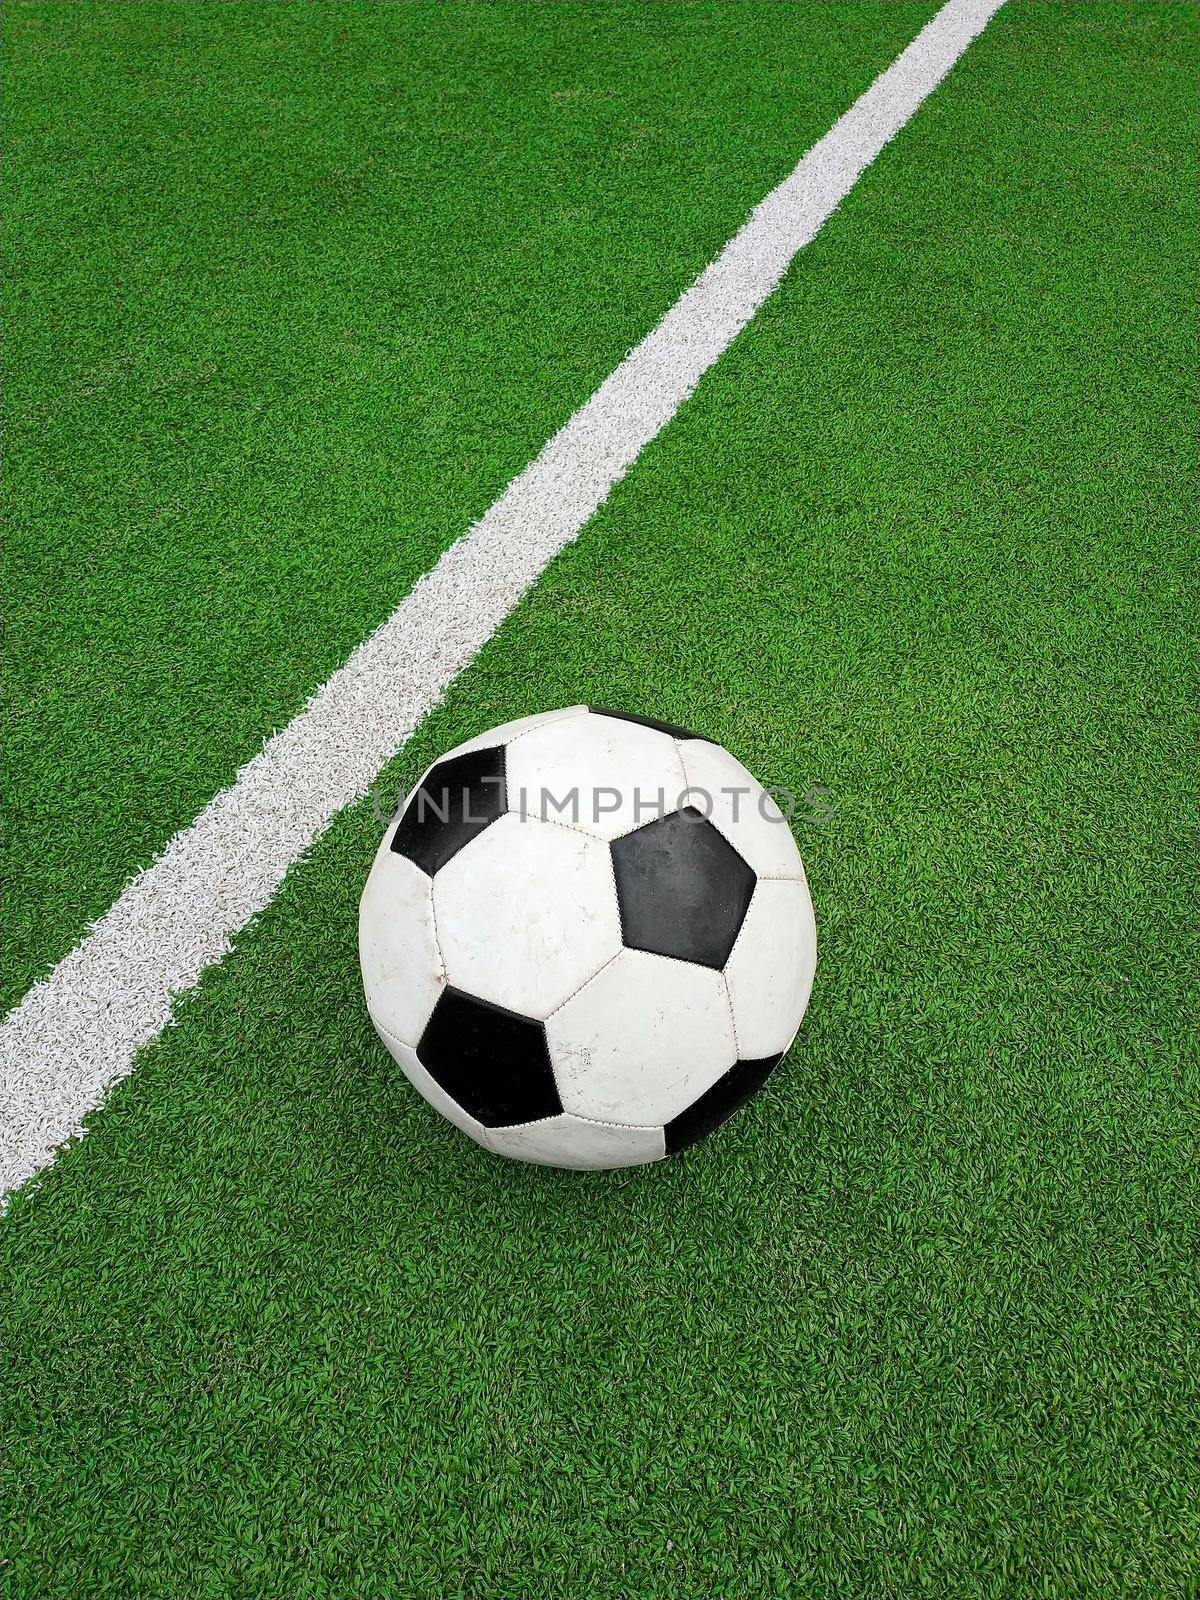 Close up one black and white football ball over green artificial turf of soccer field pitch with white marking lines, elevated, high angle view, personal perspective